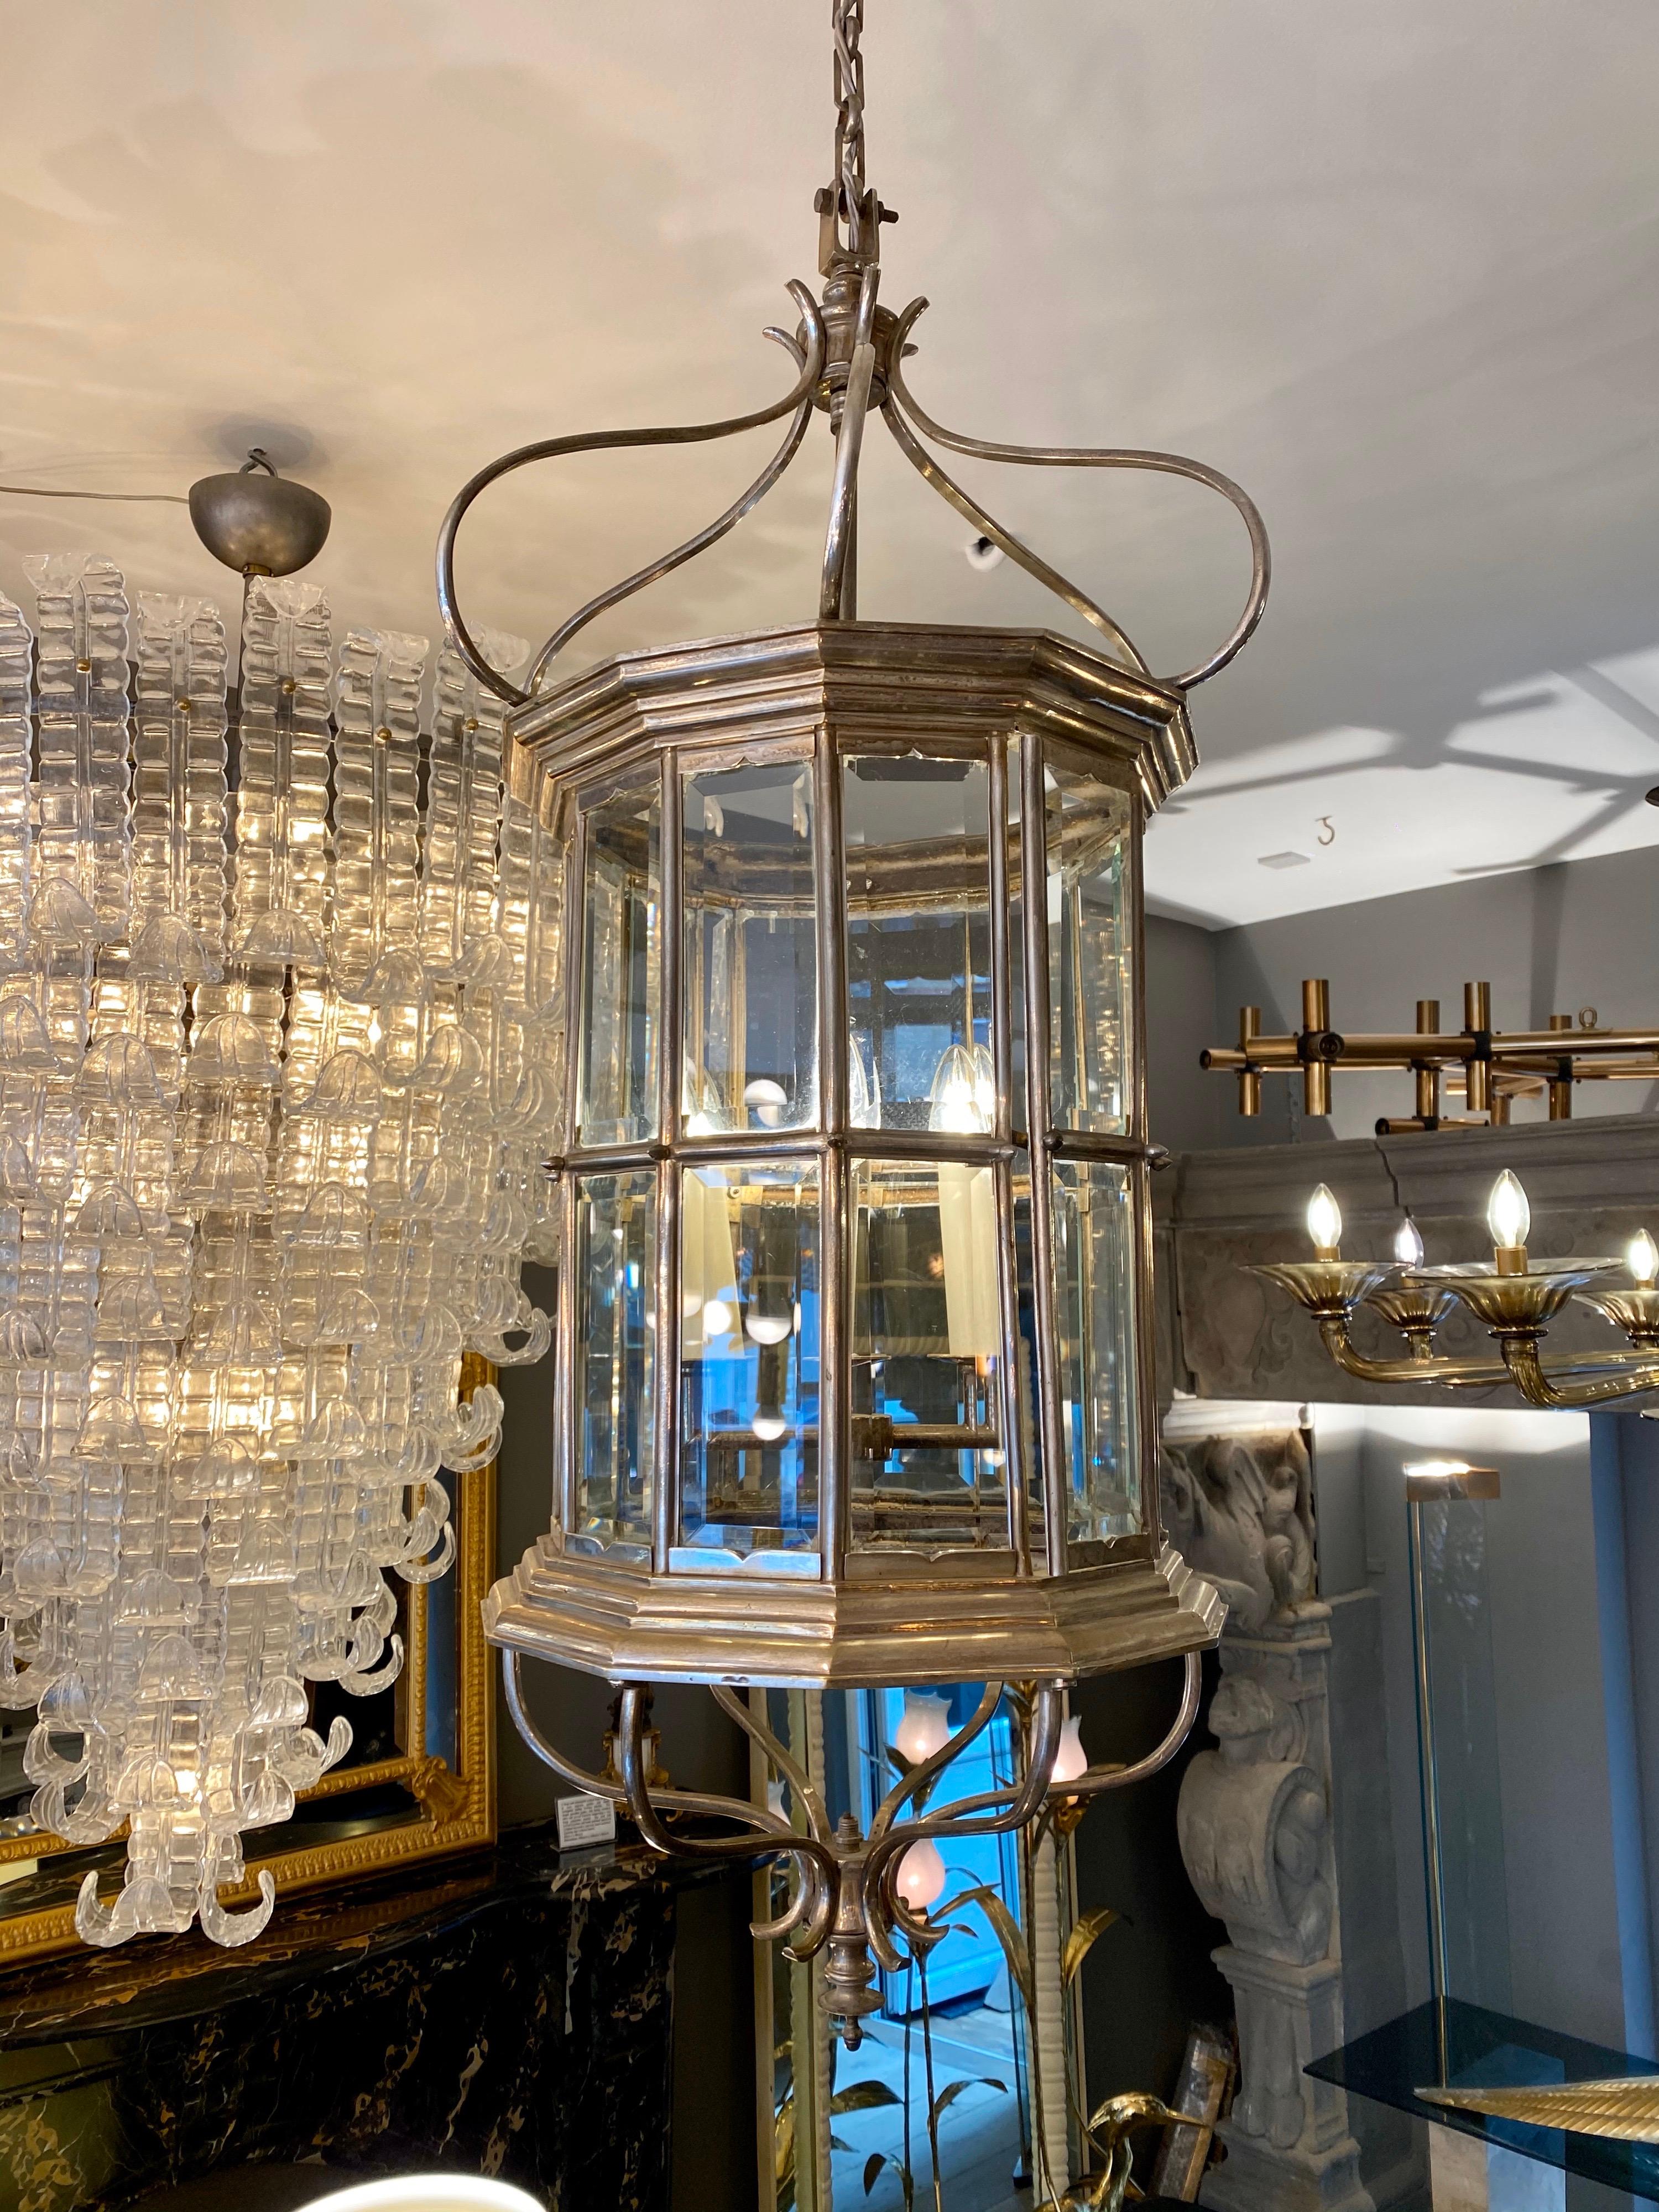 A large French nickel-plated lantern, with 4 light fittings, scrolling canopy and stepped framework. Twelve sided with 24 beveled pieces of glass, with door and catch to access interior. Included is 2.5 meters of chain and ceiling rose.